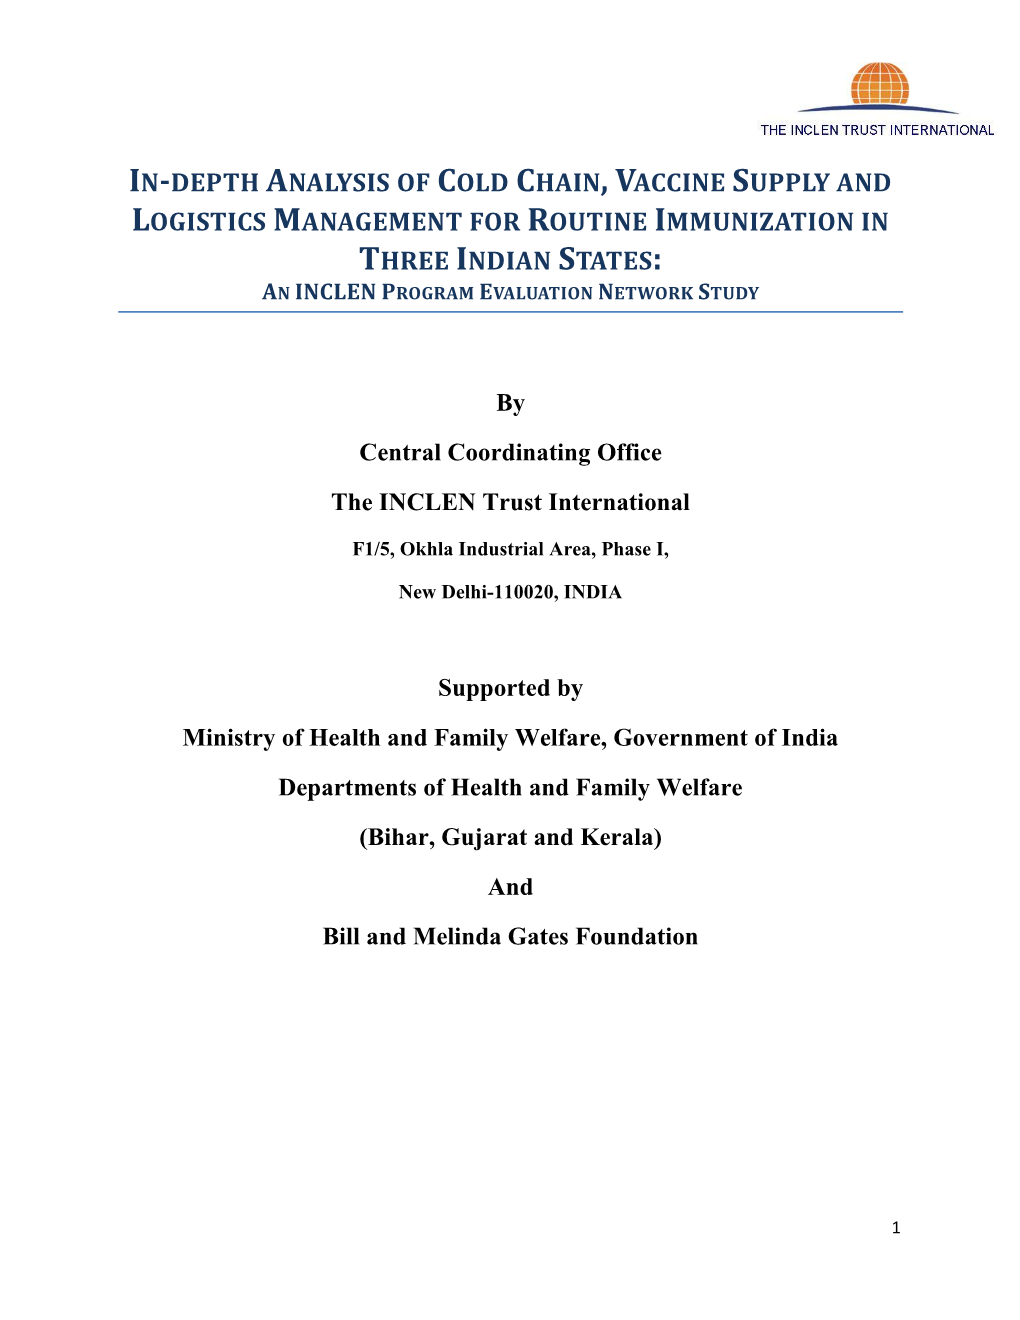 In-Depth Analysis of Cold Chain, Vaccine Supply and Logistics Management for Routine Immunization in Three Indian States: an Inclen Program Evaluation Network Study